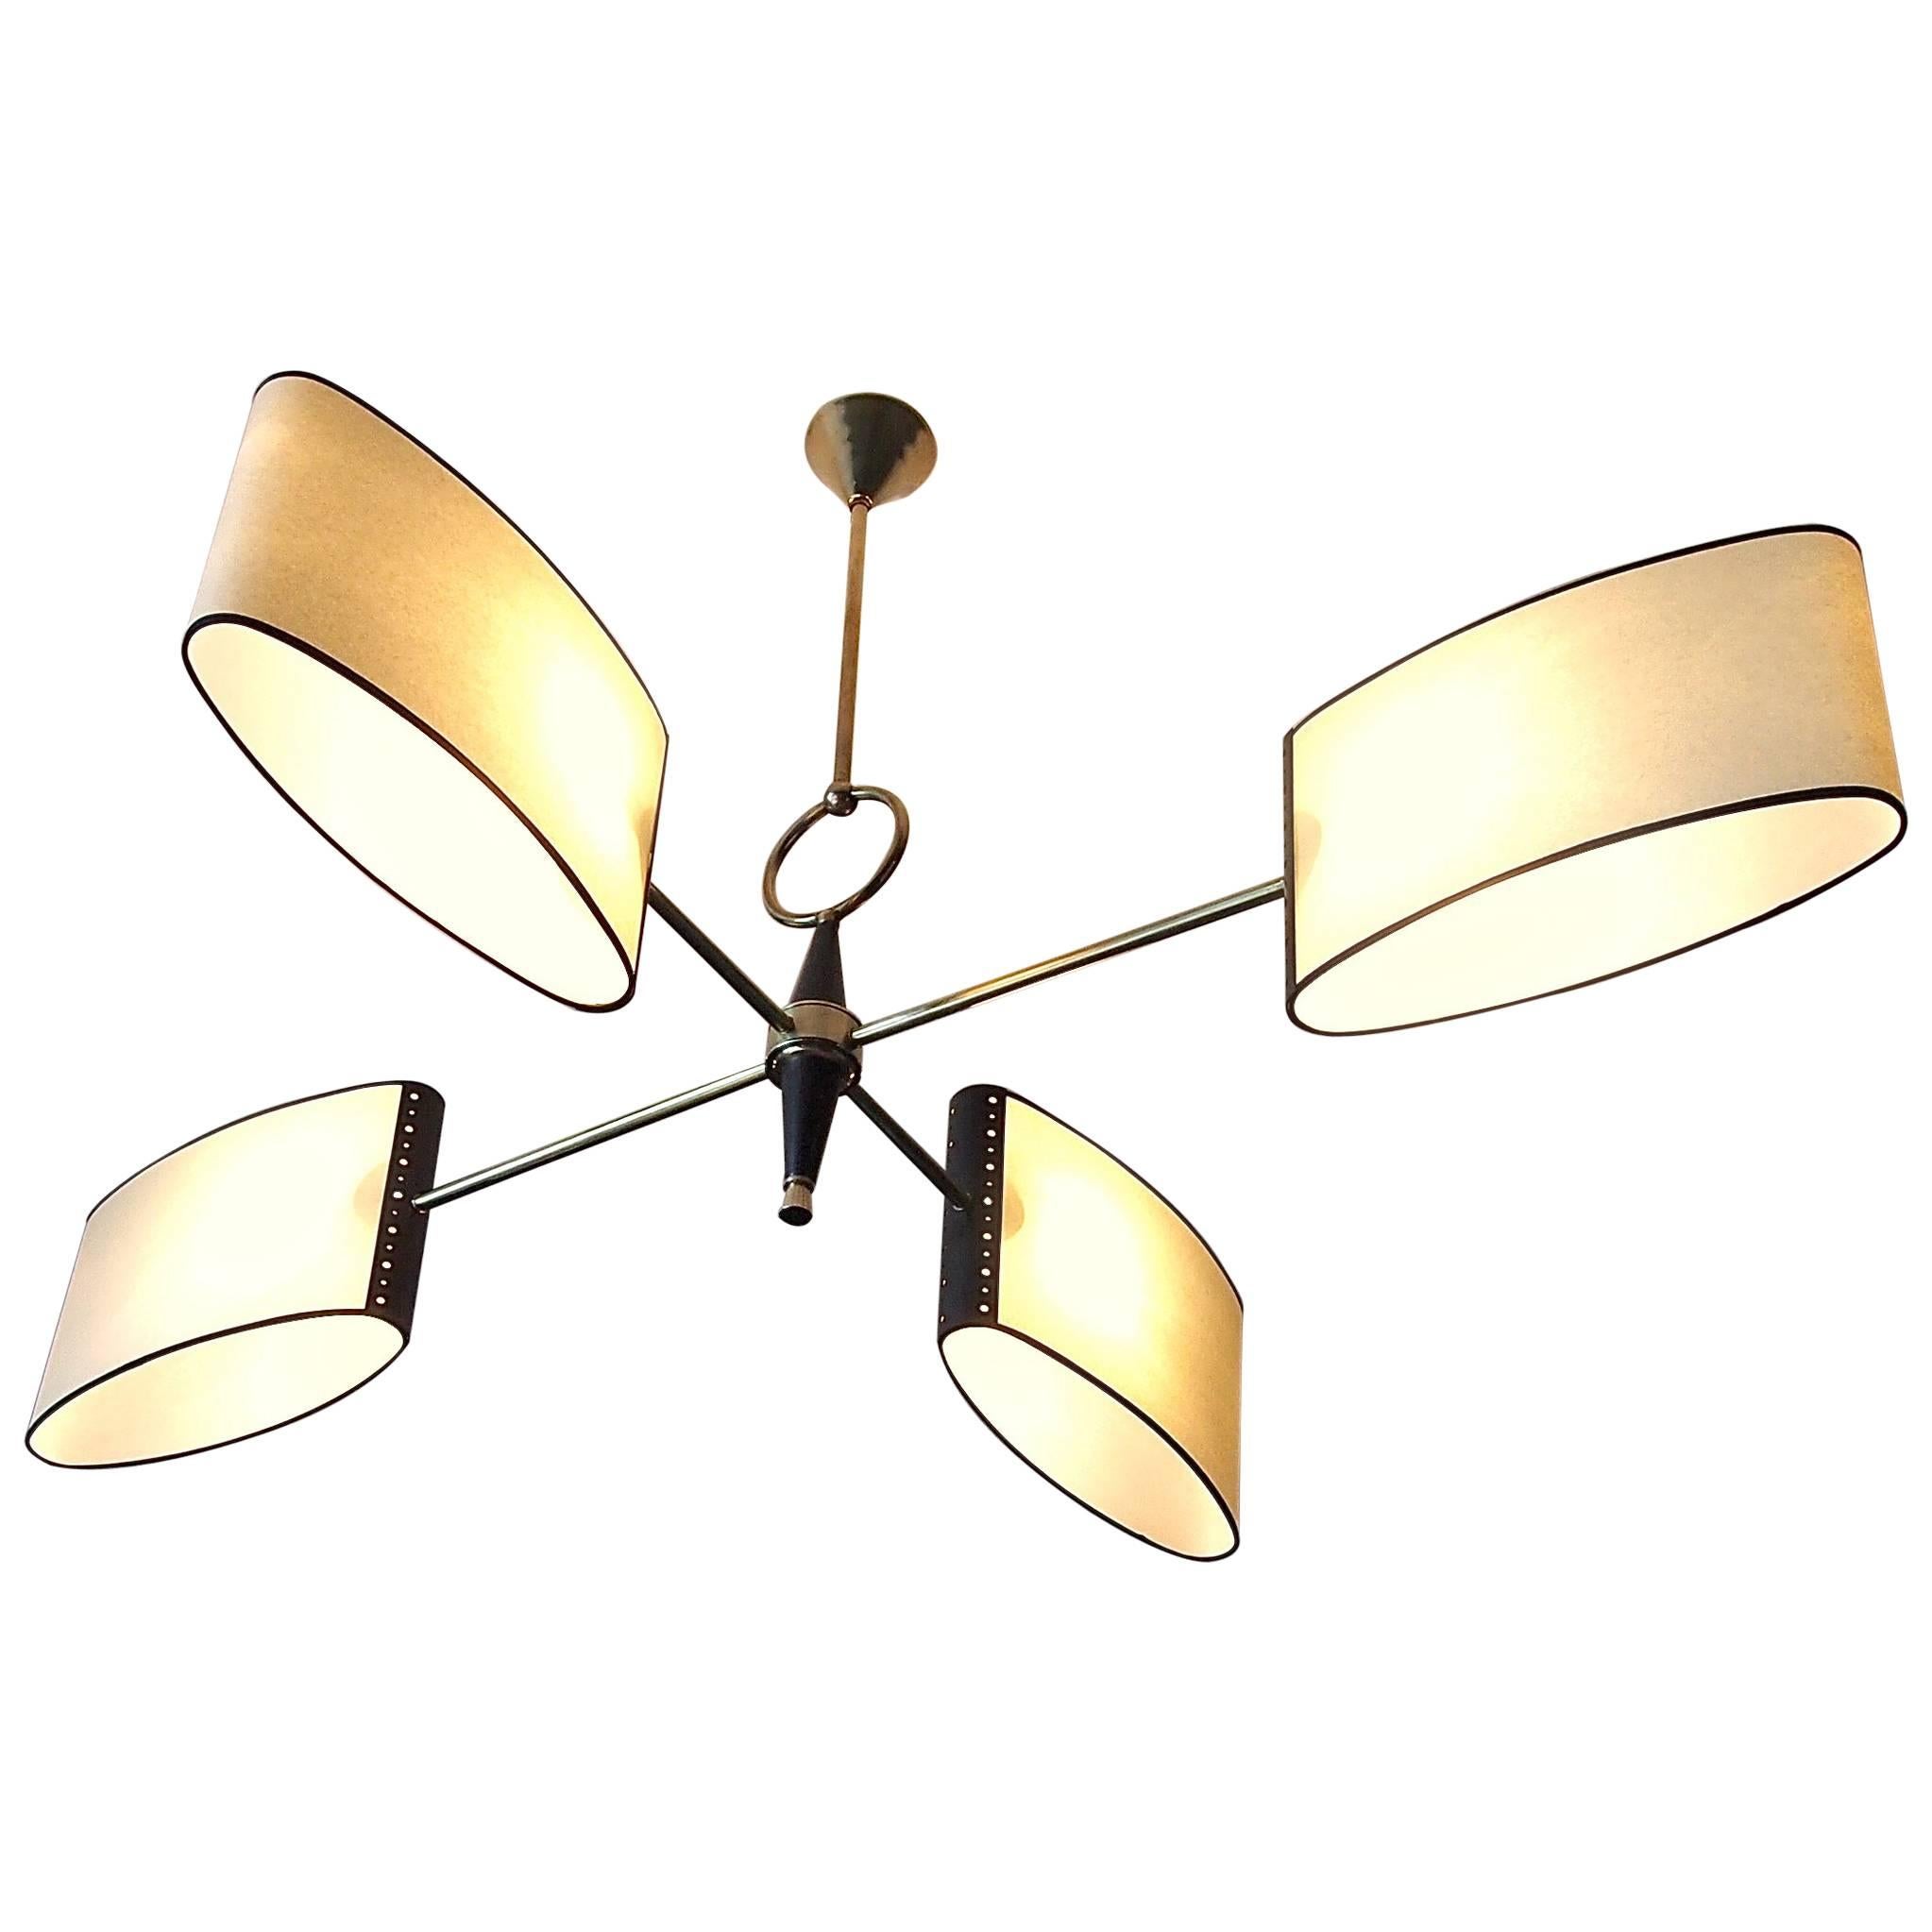 1950s Chandelier with Shifted Lighted Arms by Maison Lunel